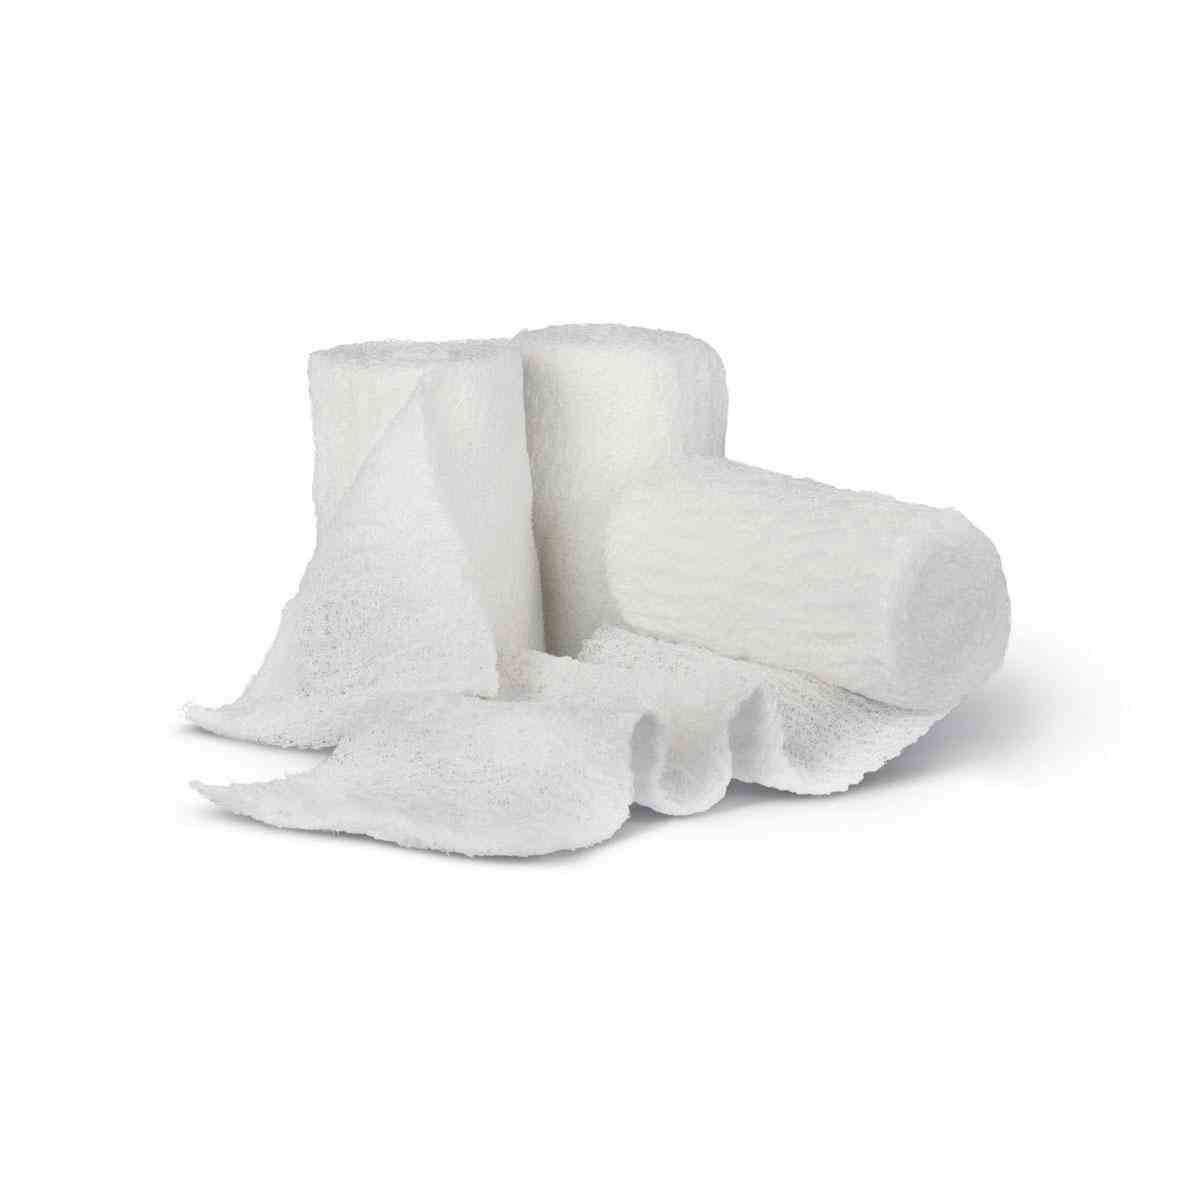 Medline Bulkee Lite Non-Sterile Cotton Conforming Bandages, NON27492H, 2" X 3 1/2 yd. - Box of 12